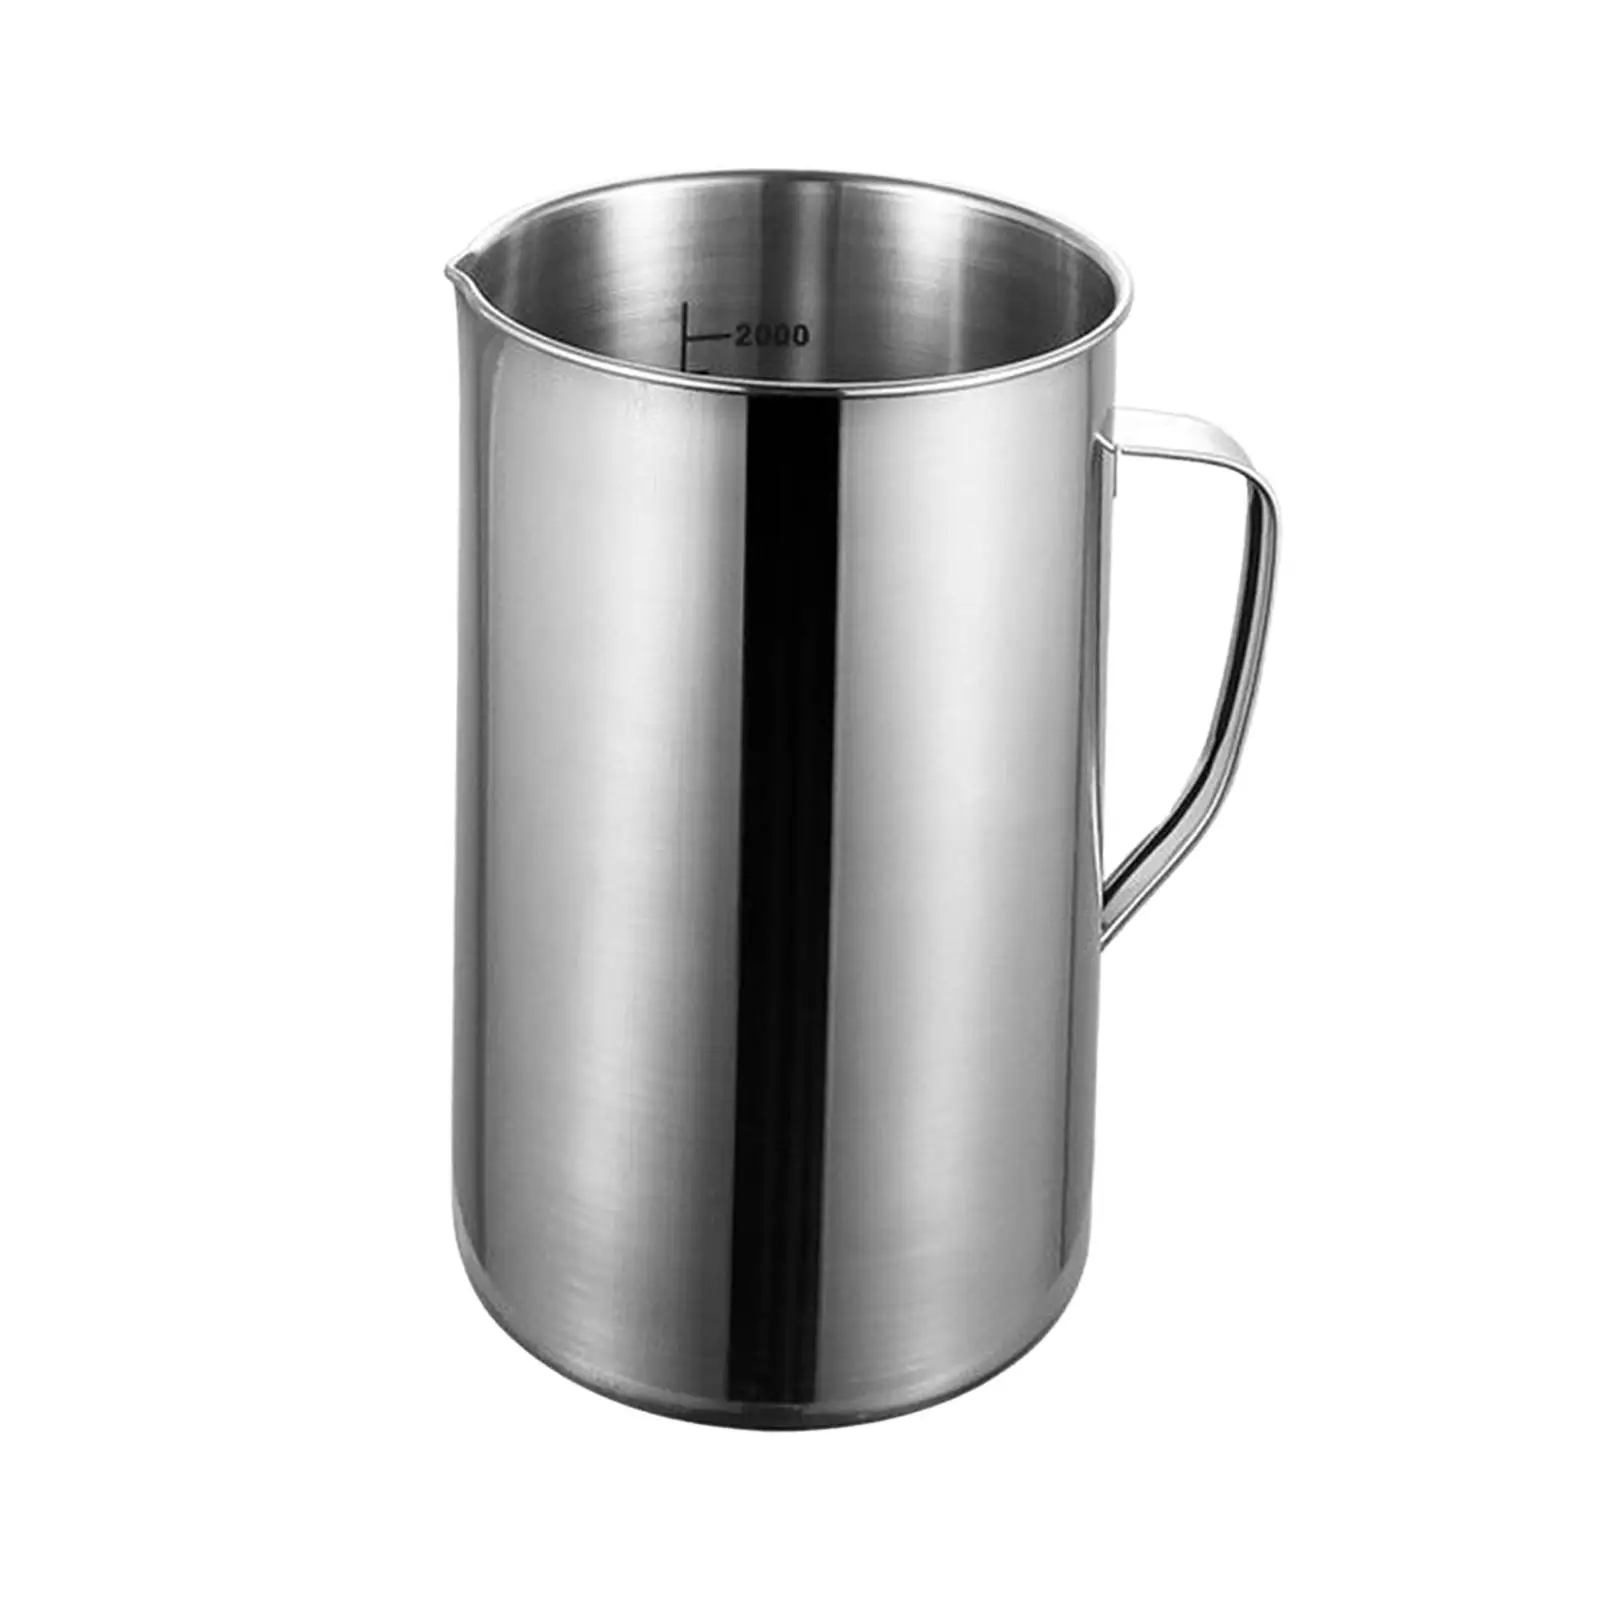 Steel Measuring Cup 2000ml Kitchen Tools Large Capacity for Restaurant Bar Party Measuring Jug Pouring Cup Liquid Measuring Cup